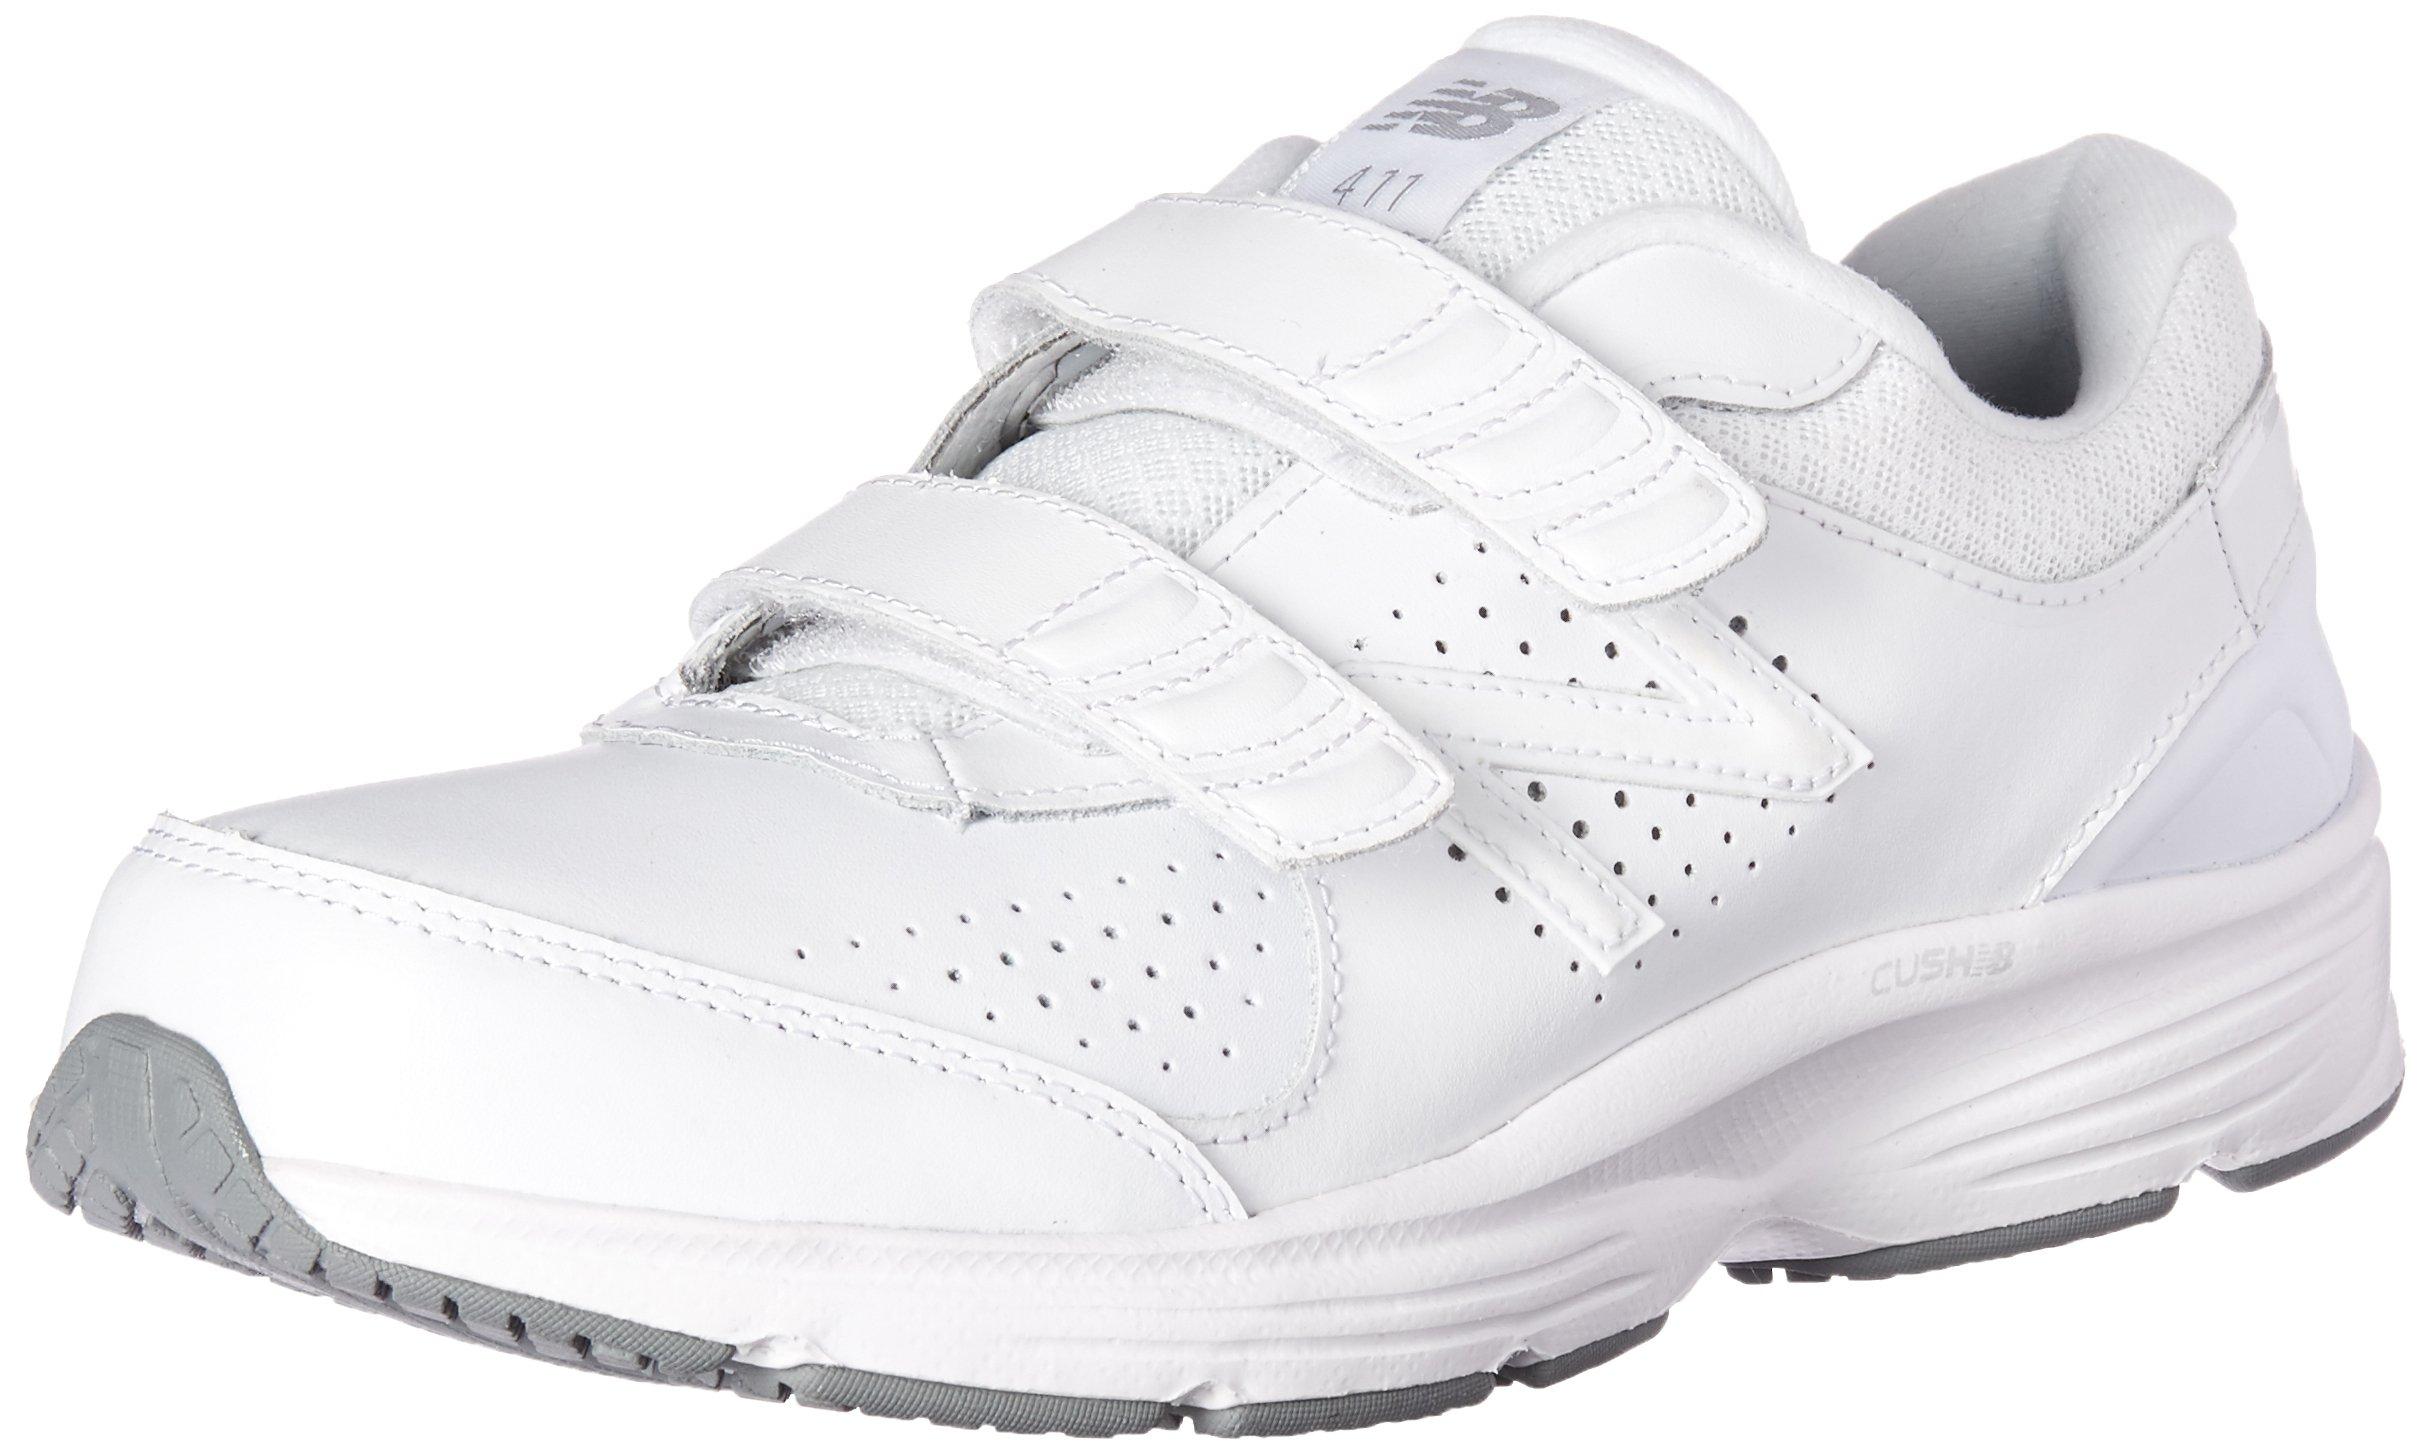 New Balance 411 V2 Hook And Loop Walking Shoe in White | Lyst